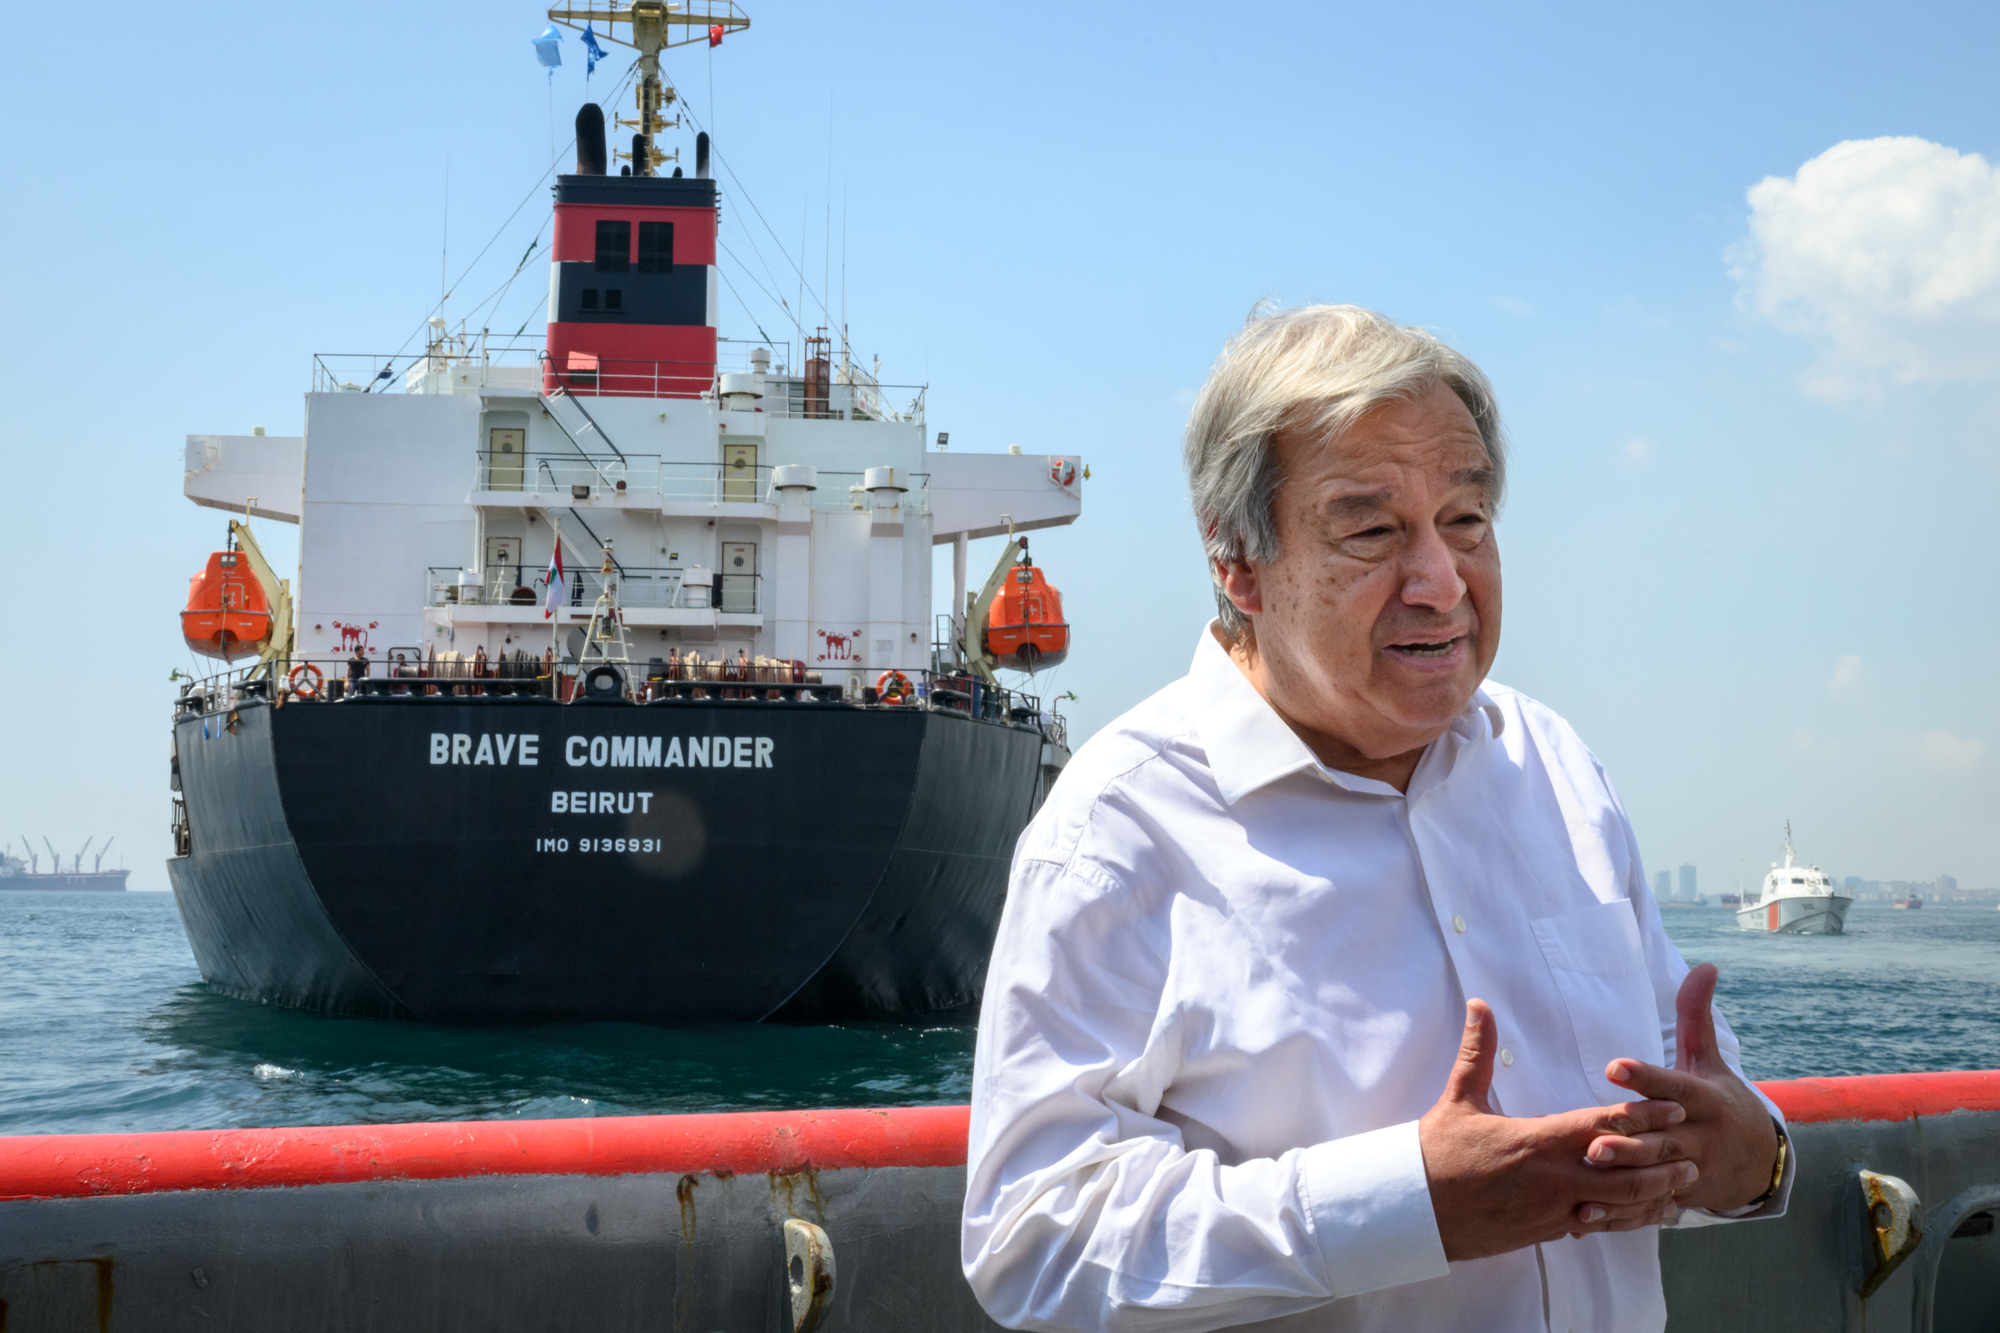 Secretary-General António Guterres travelled to Istanbul and oversaw the departure of two ships involved in the Black Sea Grain Initiative, a UN-brokered operation to bring urgently needed hunger relief to the Horn of Africa.